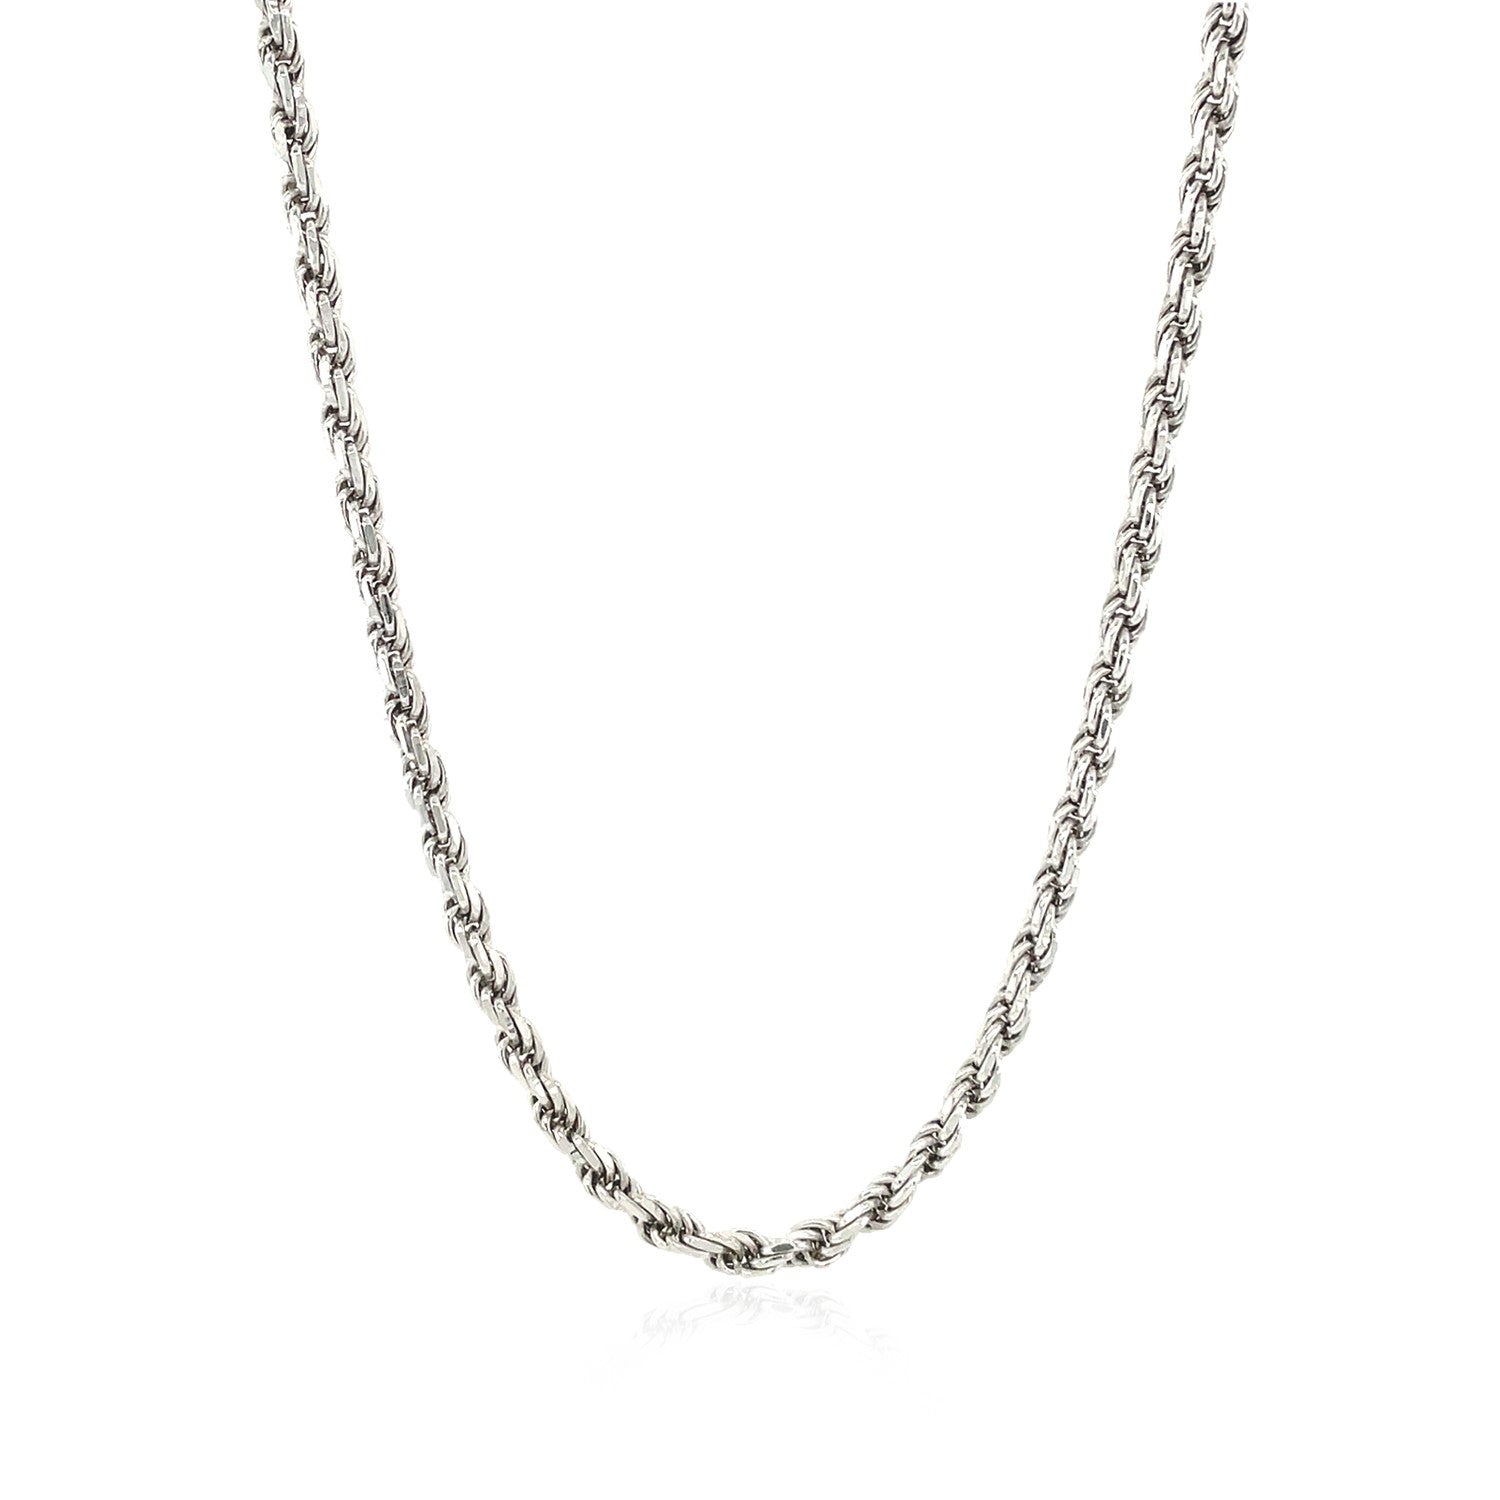 Sterling Silver 2.9mm Diamond Cut Rope Style Chain